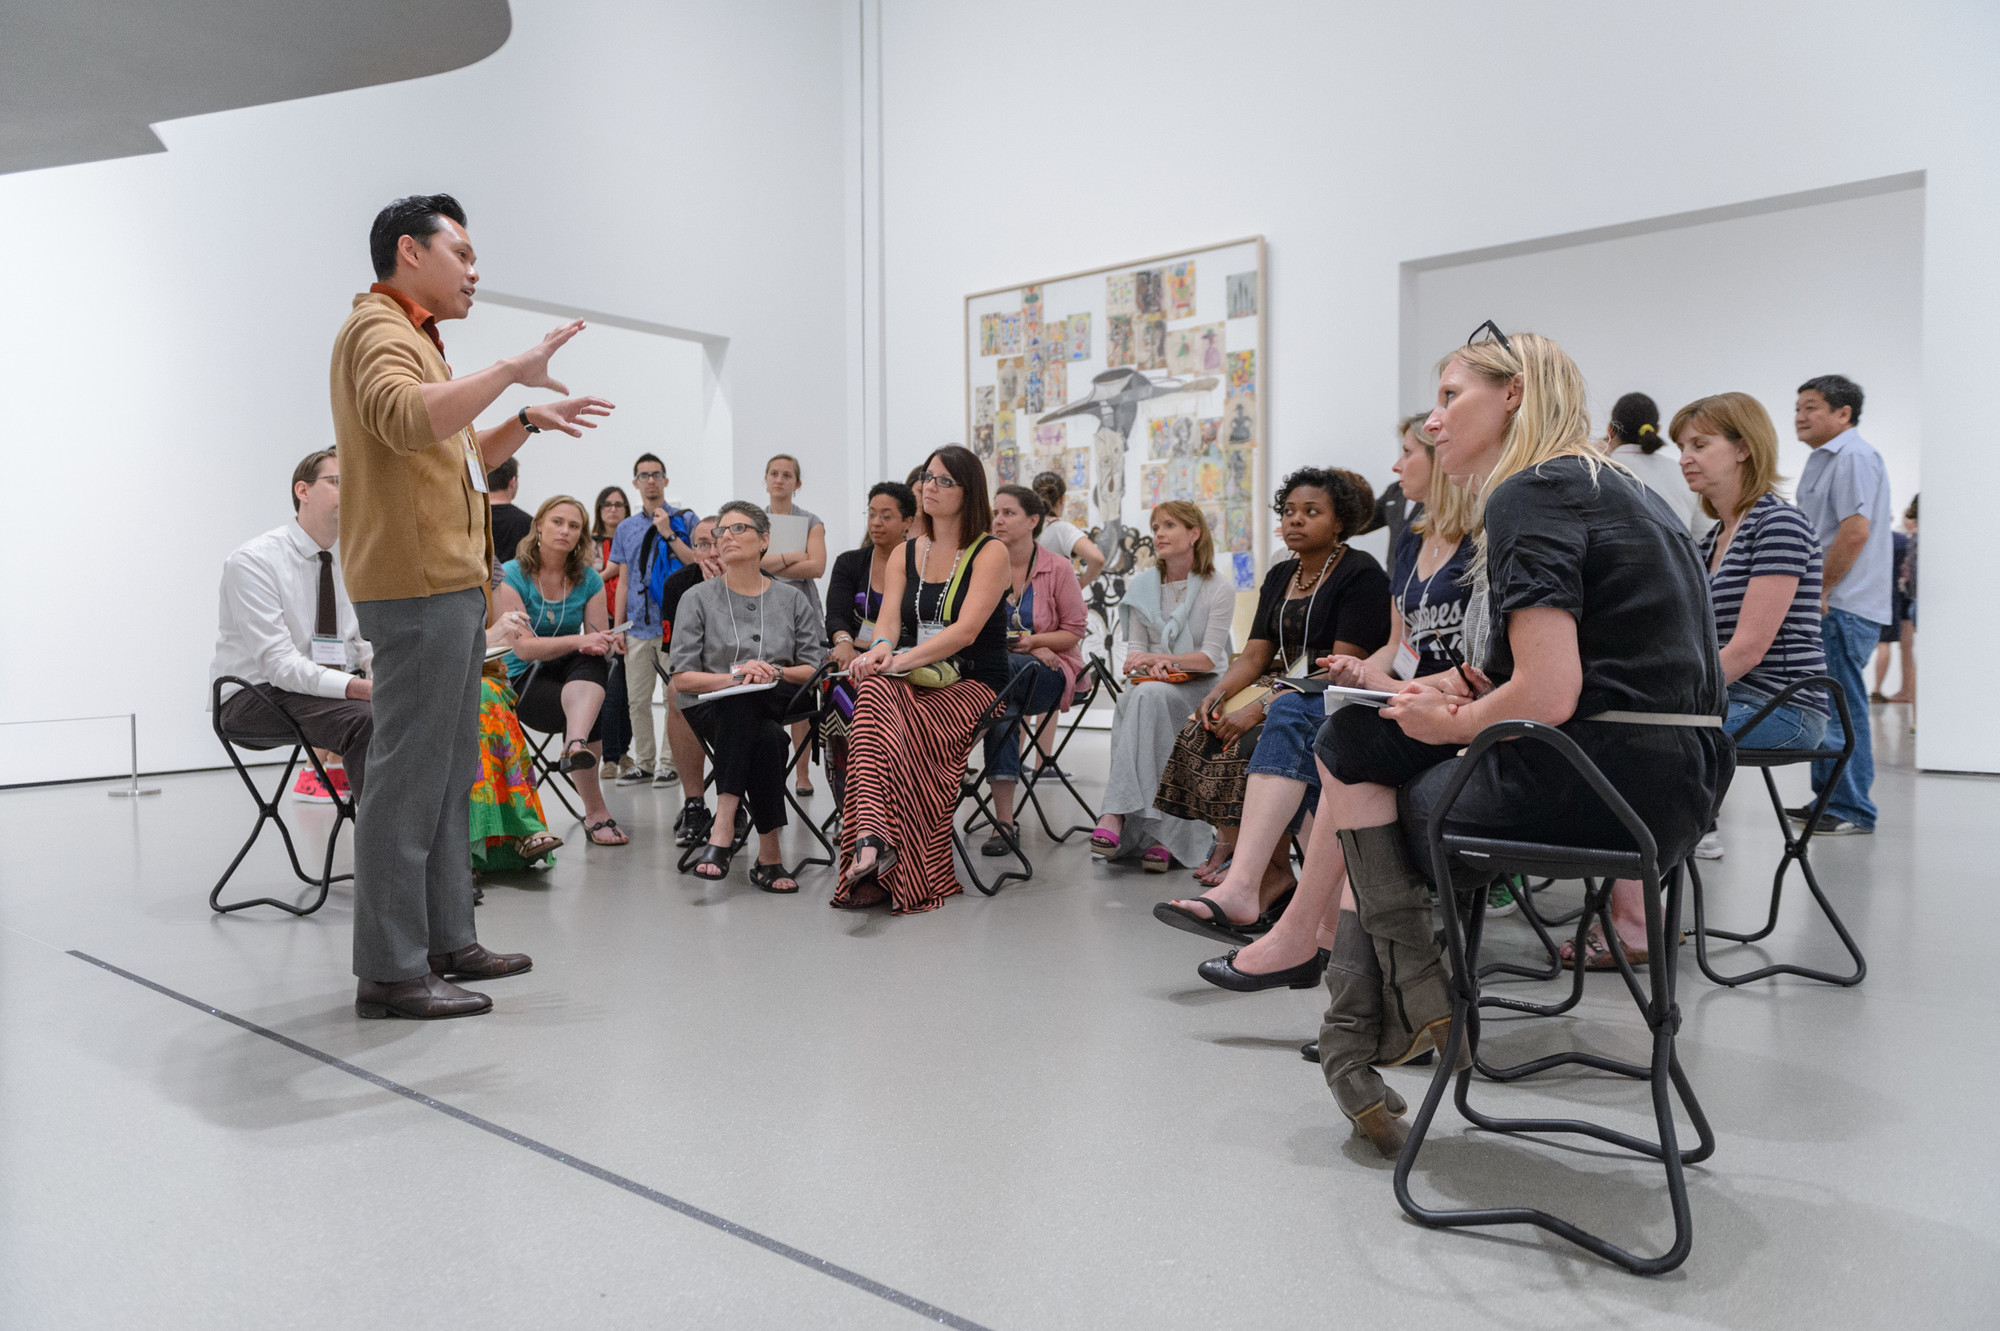 MoMA educator Francis Estrada speaking with teachers during Connecting Collections: Summer Institute for Teachers. 2013. Photo: Filip Wolak